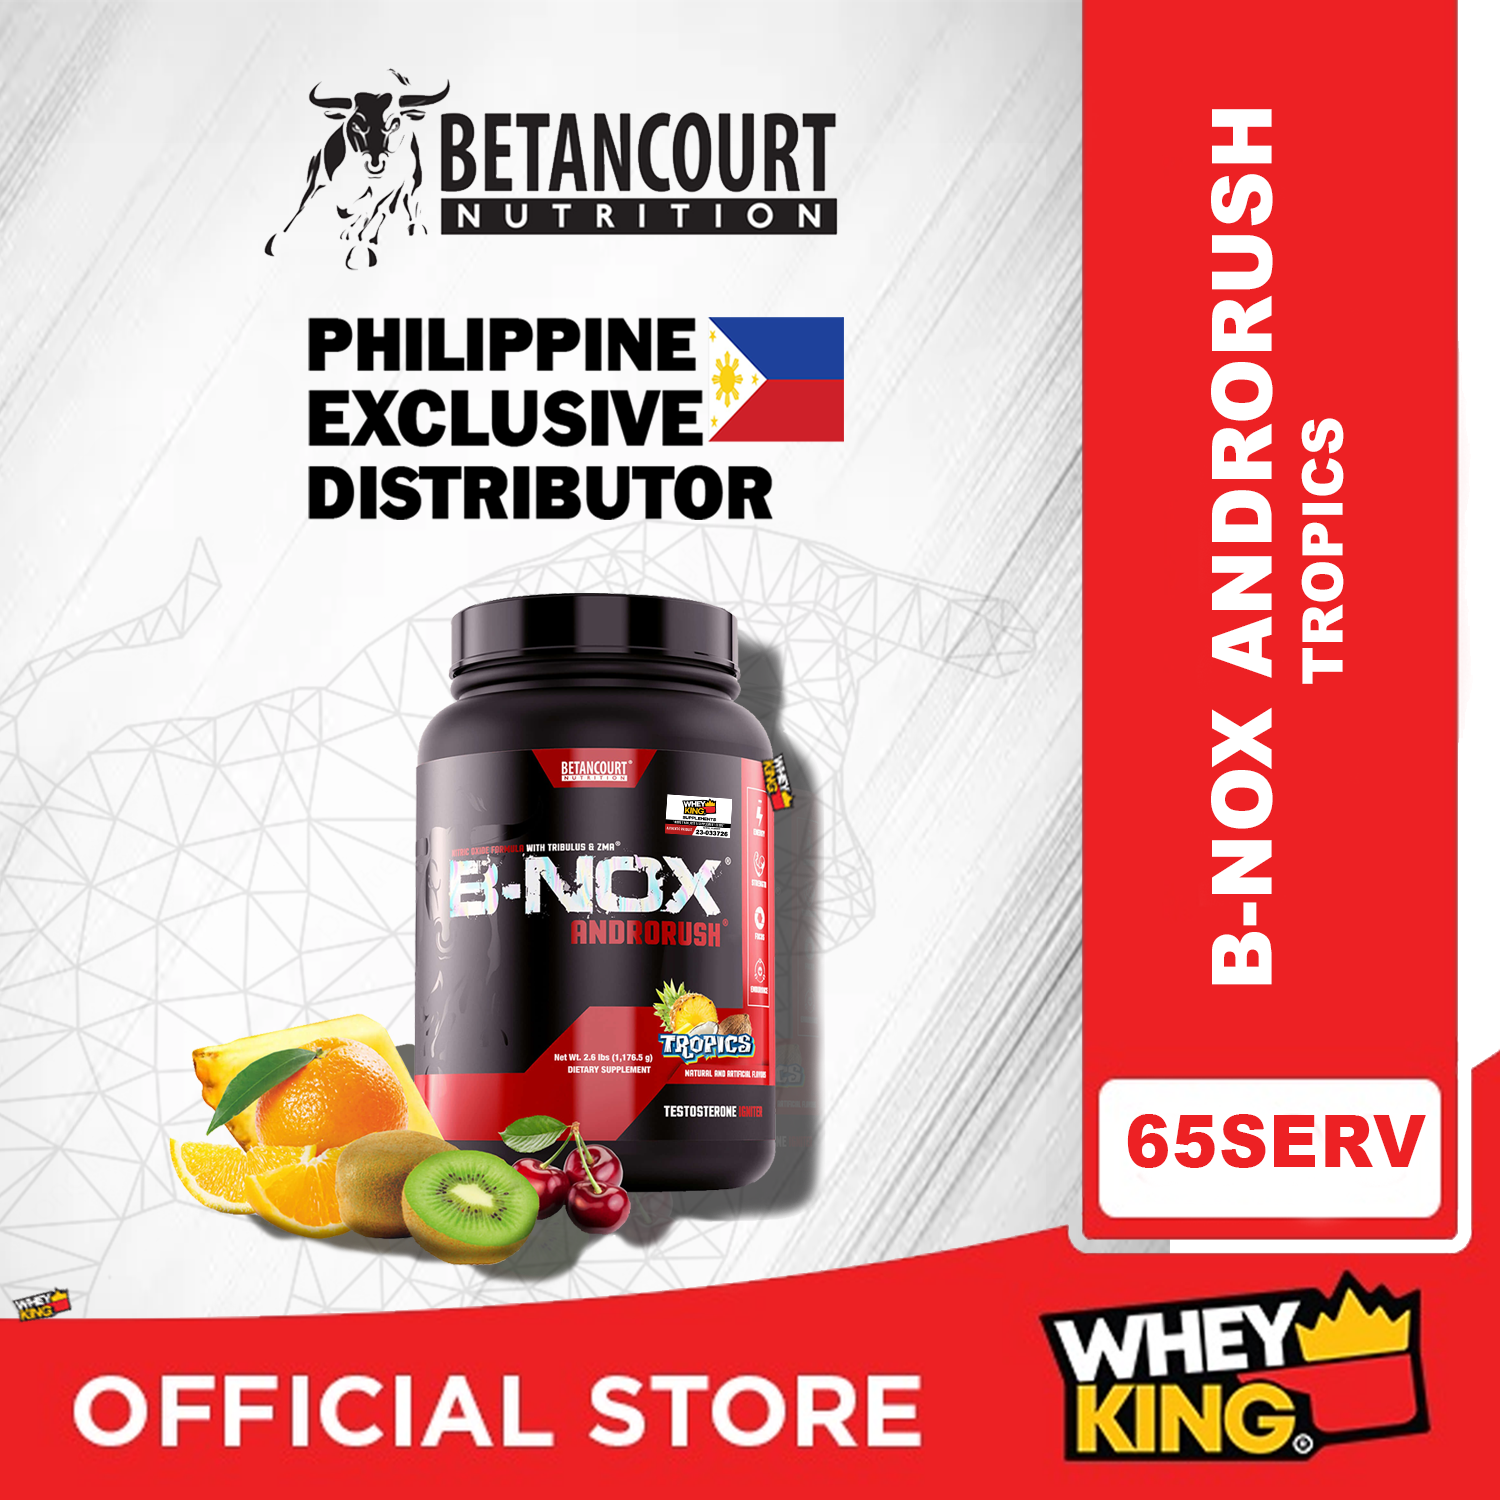 [Clearance Expiry March 2024] Betancourt B-NOX Androrush Preworkout & Testosterone Booster 65 serving